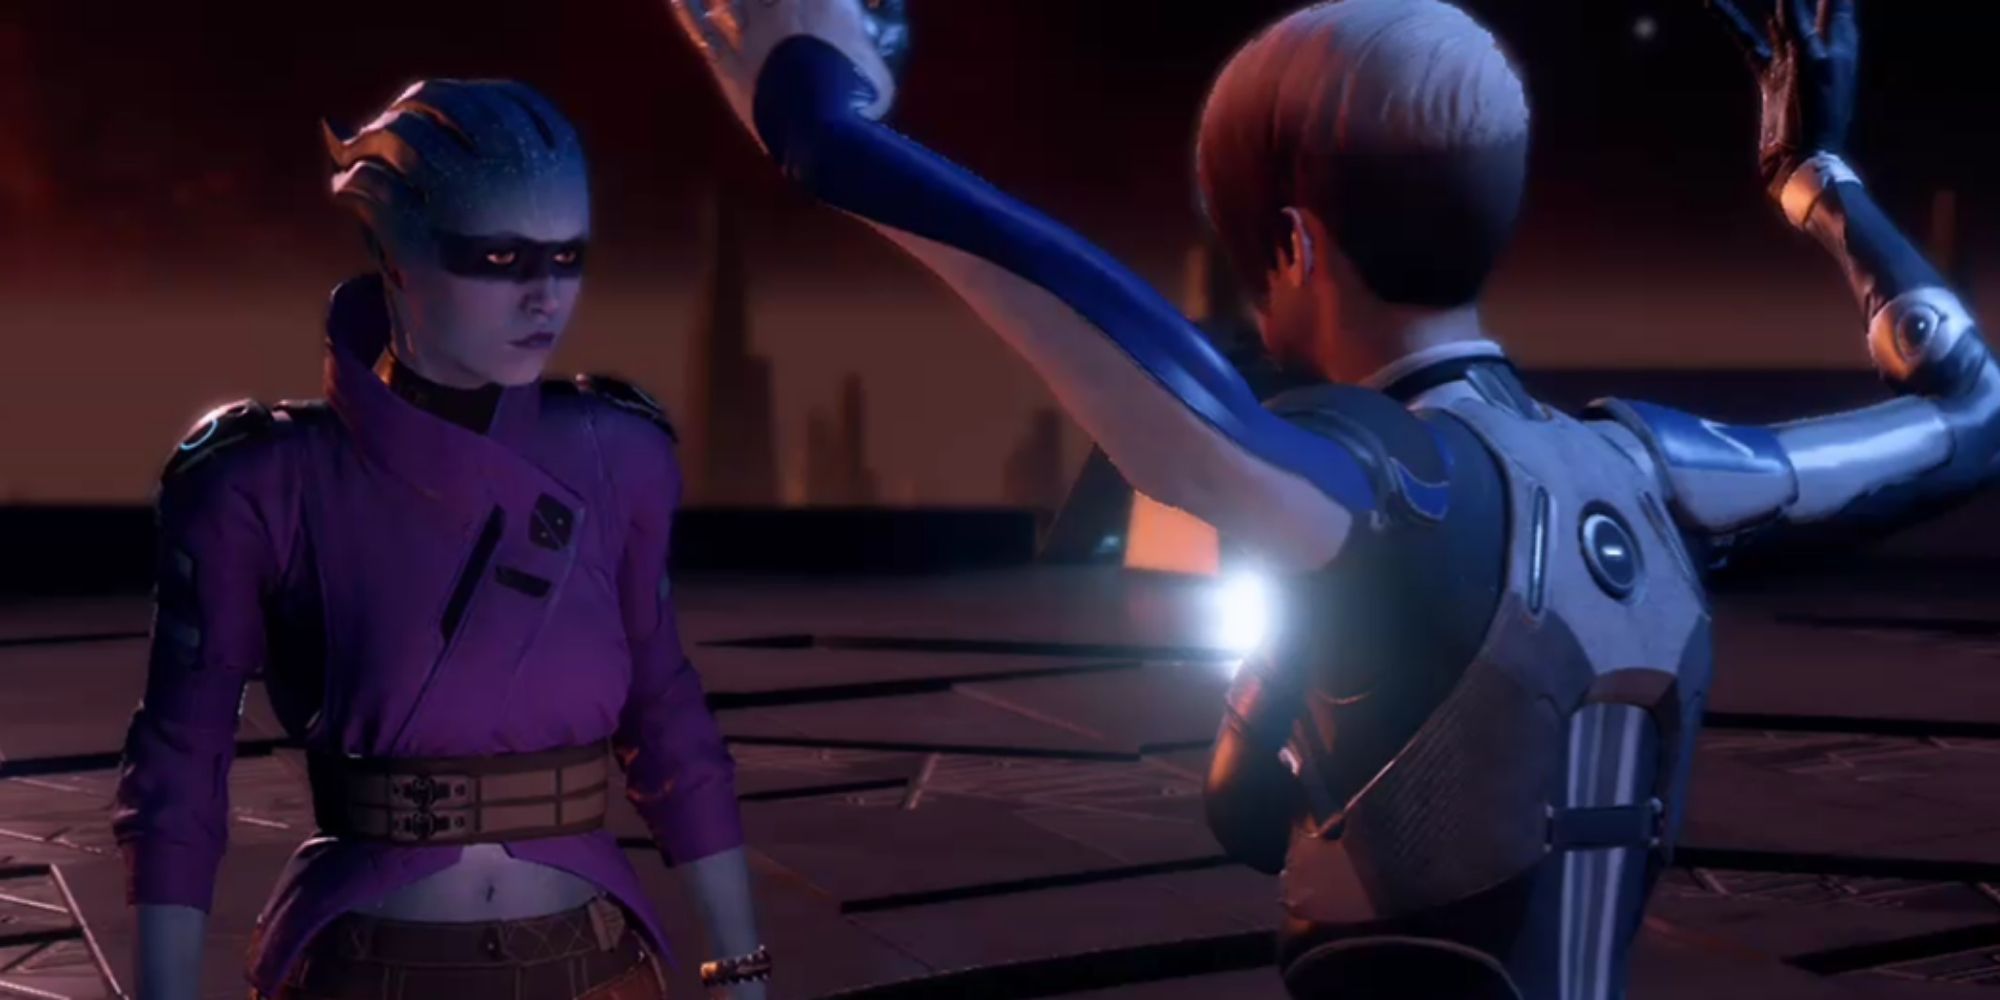 Mass Effect Andromeda - Cora raising her arms with Peebee looking at her